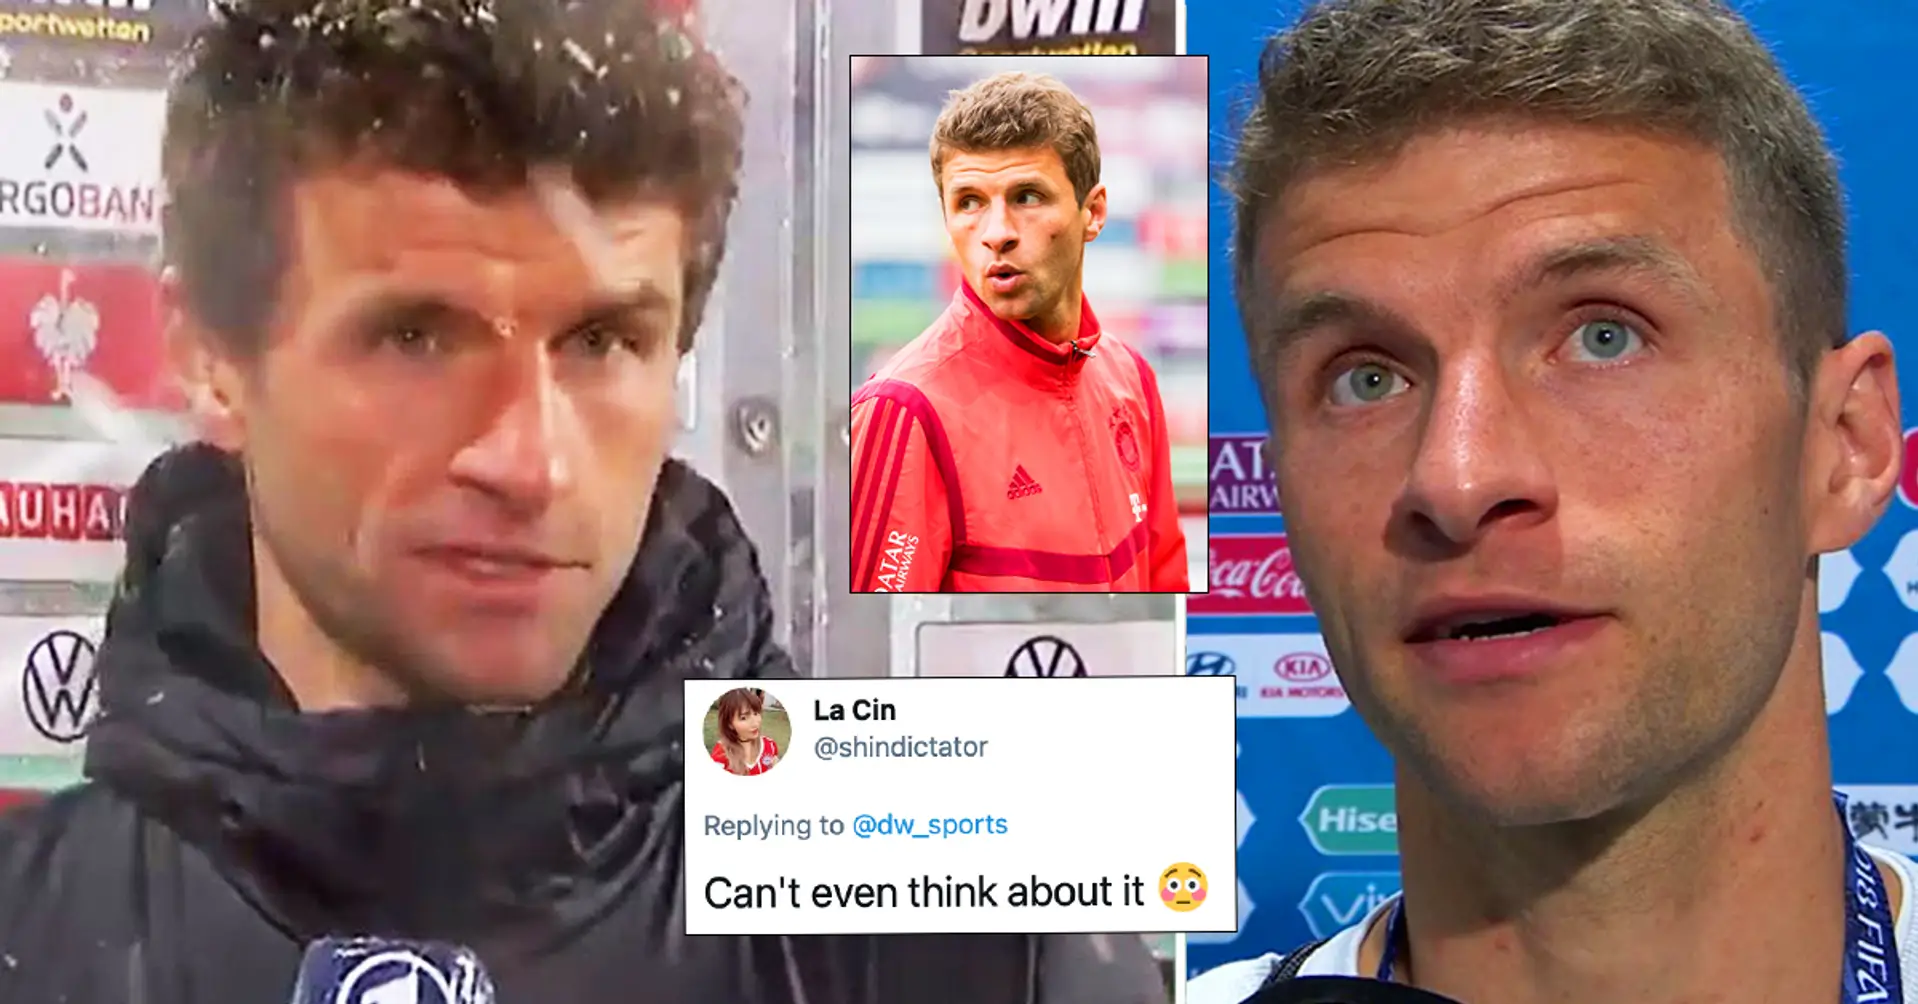 Thomas Muller makes surprising comment about potential transfer - 'I'm not fixed to this club'